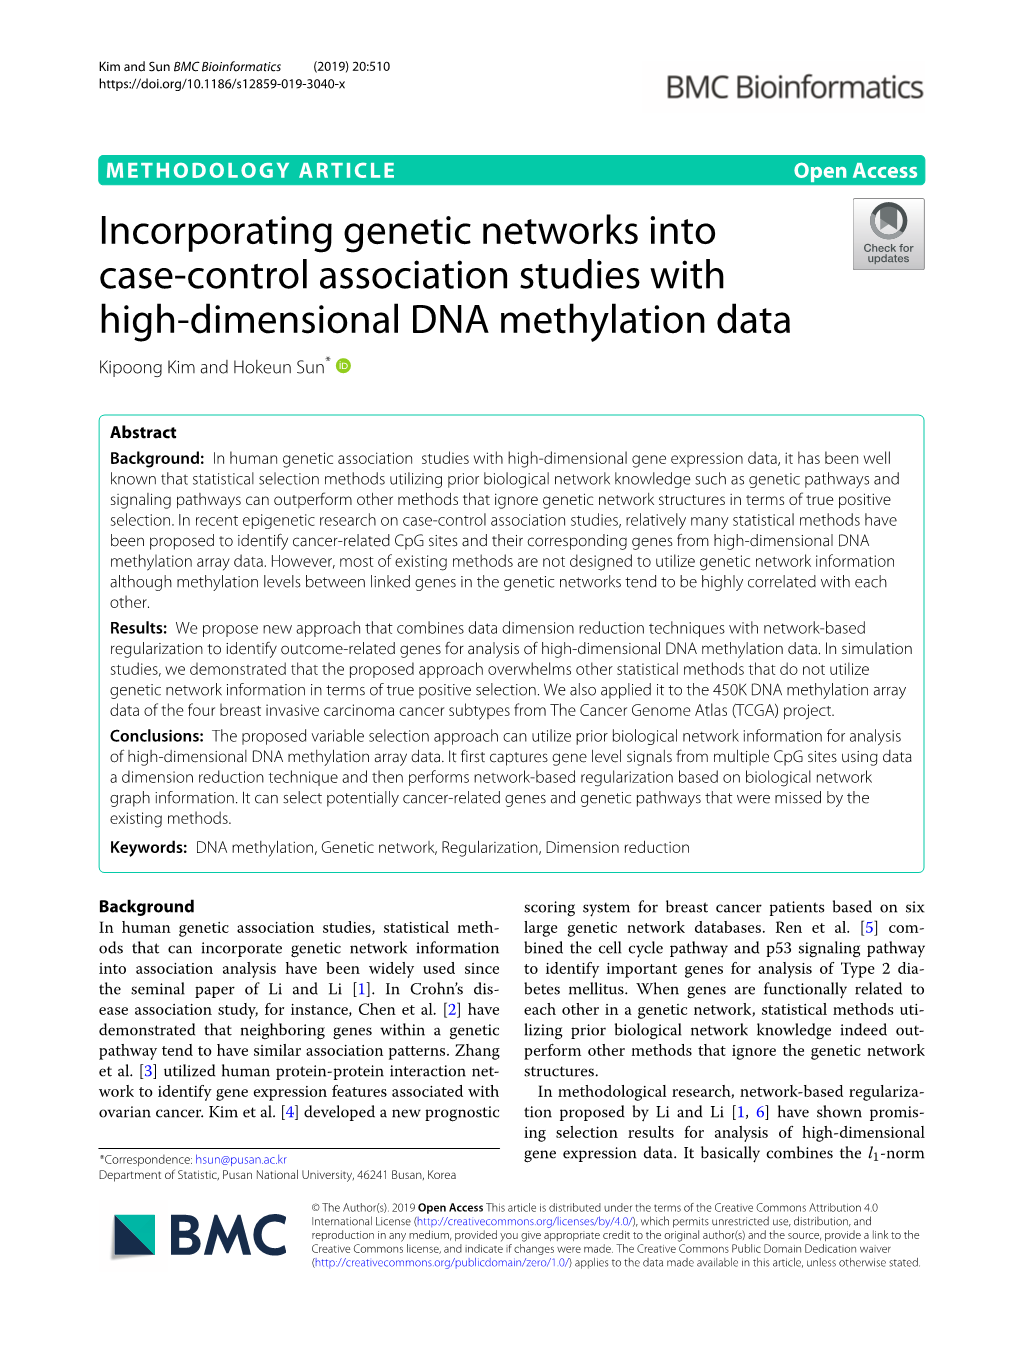 Incorporating Genetic Networks Into Case-Control Association Studies with High-Dimensional DNA Methylation Data Kipoong Kim and Hokeun Sun*